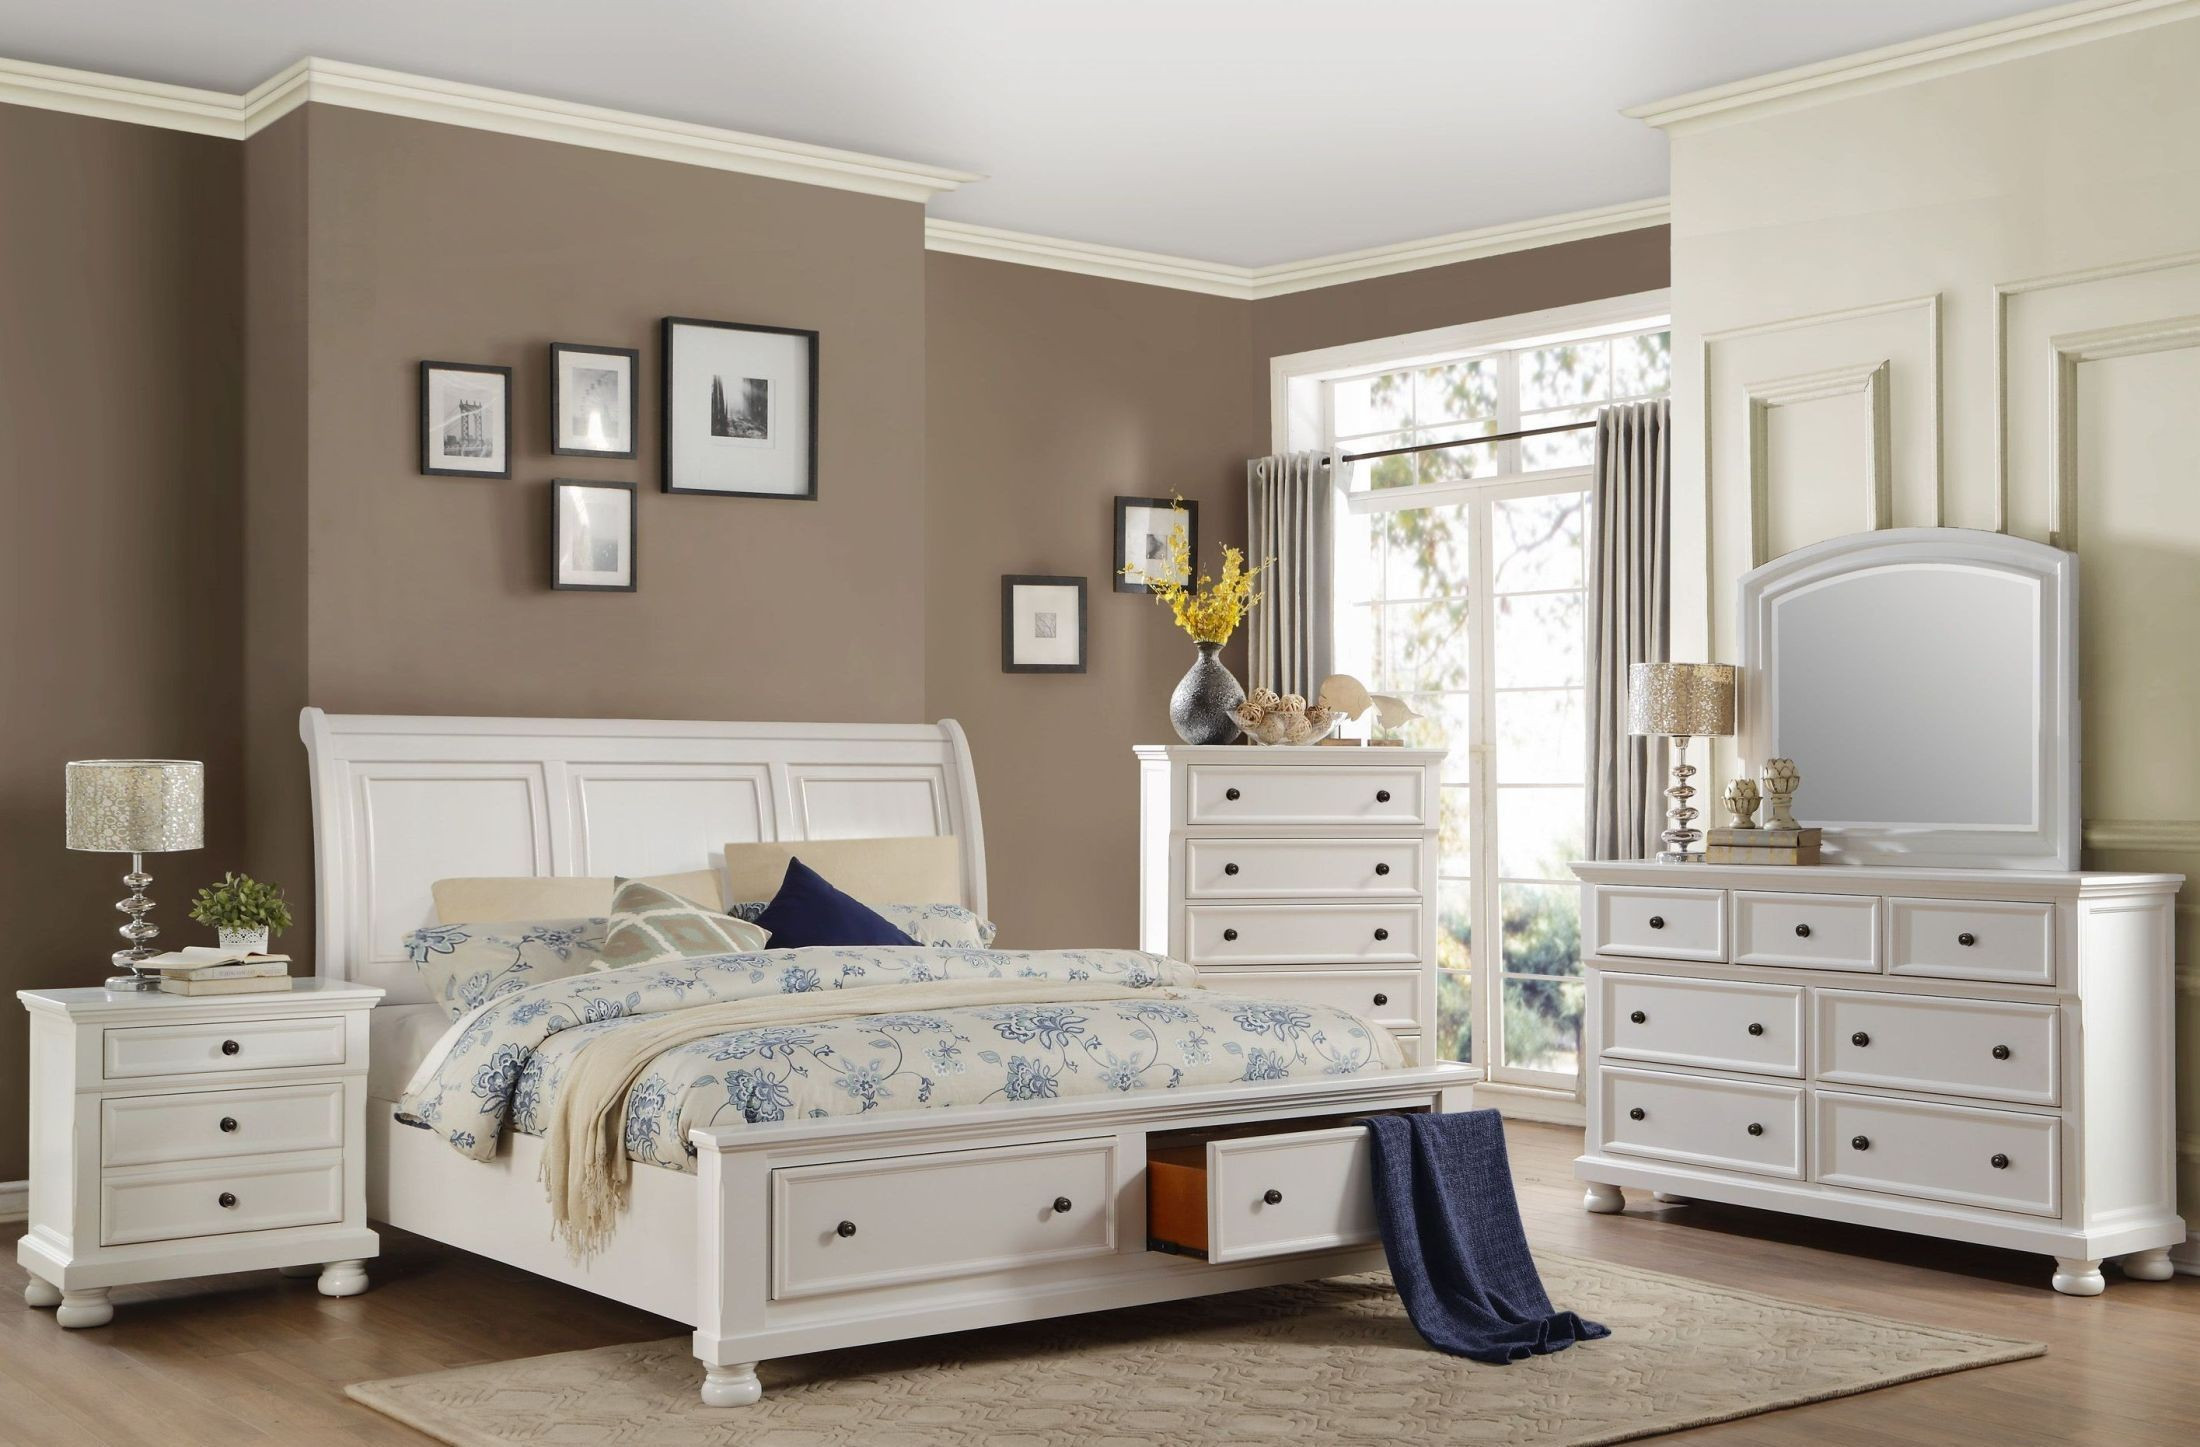 Storage Bed Bedroom Set
 Laurelin White Cal King Sleigh Storage Bed from